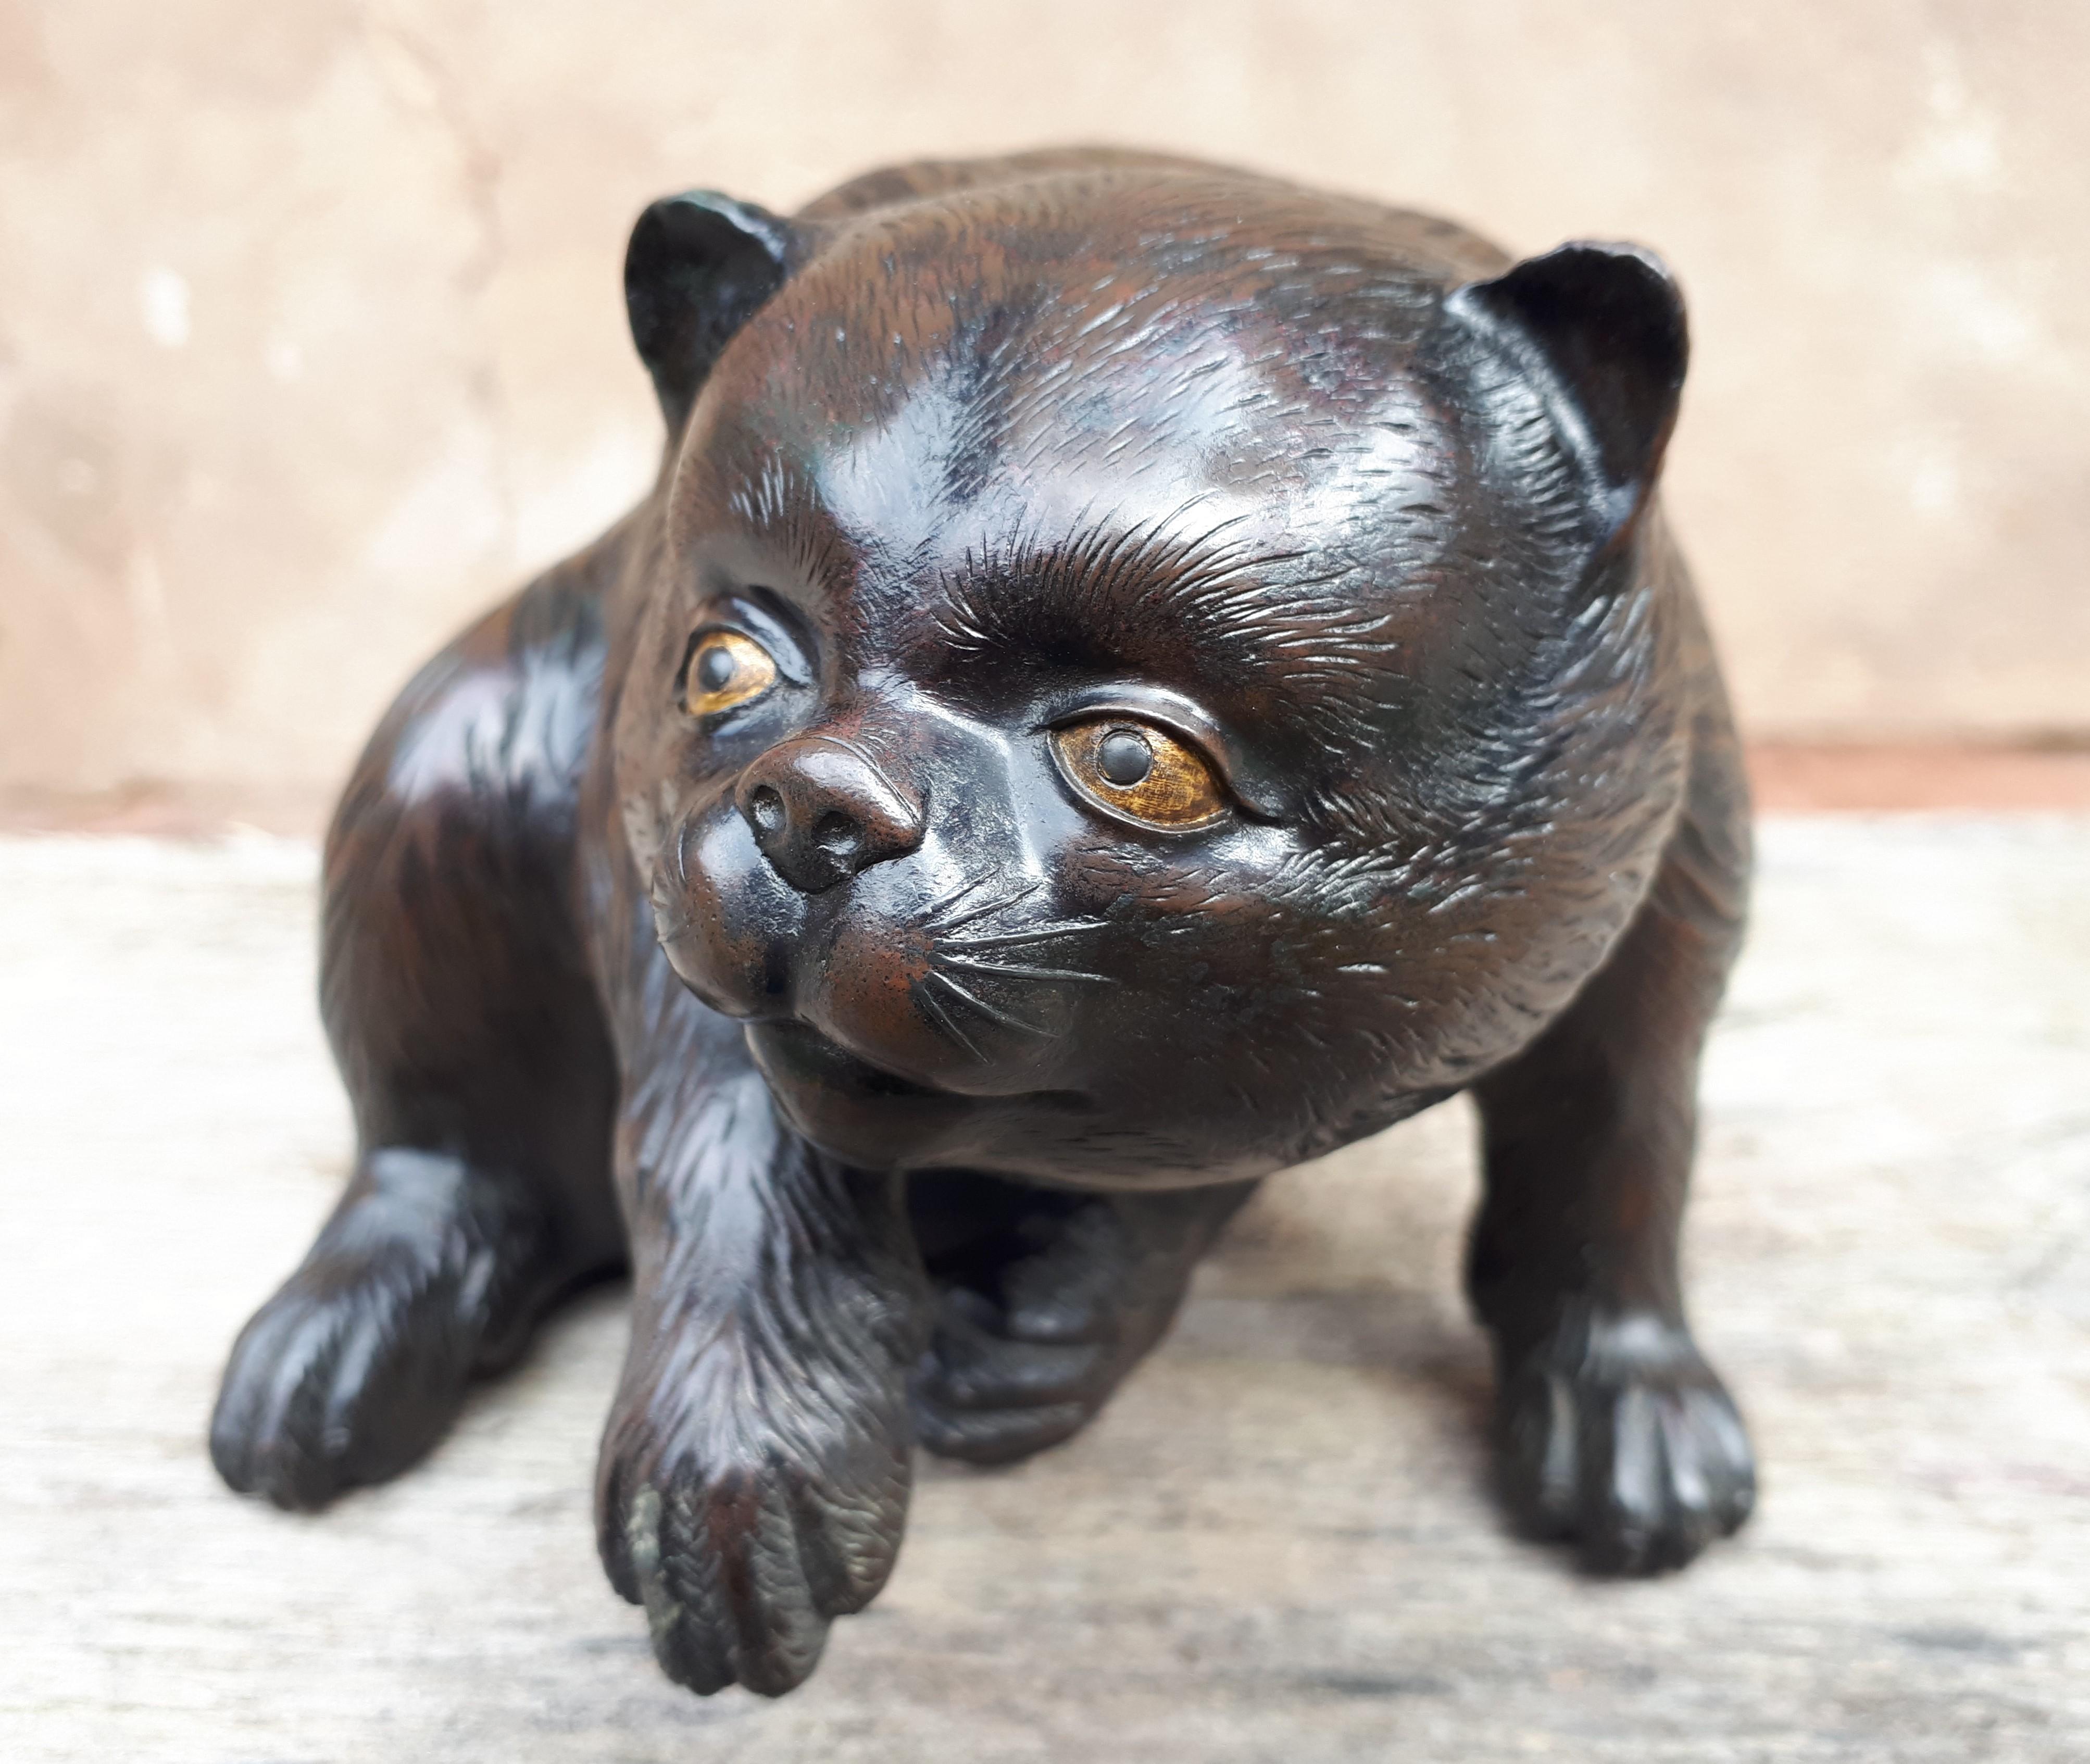 Charming bronze okimono depicting a sitting puppy raising its paw and looking into the distance.
High quality, highly detailed sculpture, the eyes inlaid with gold and shakudo.
Signed 